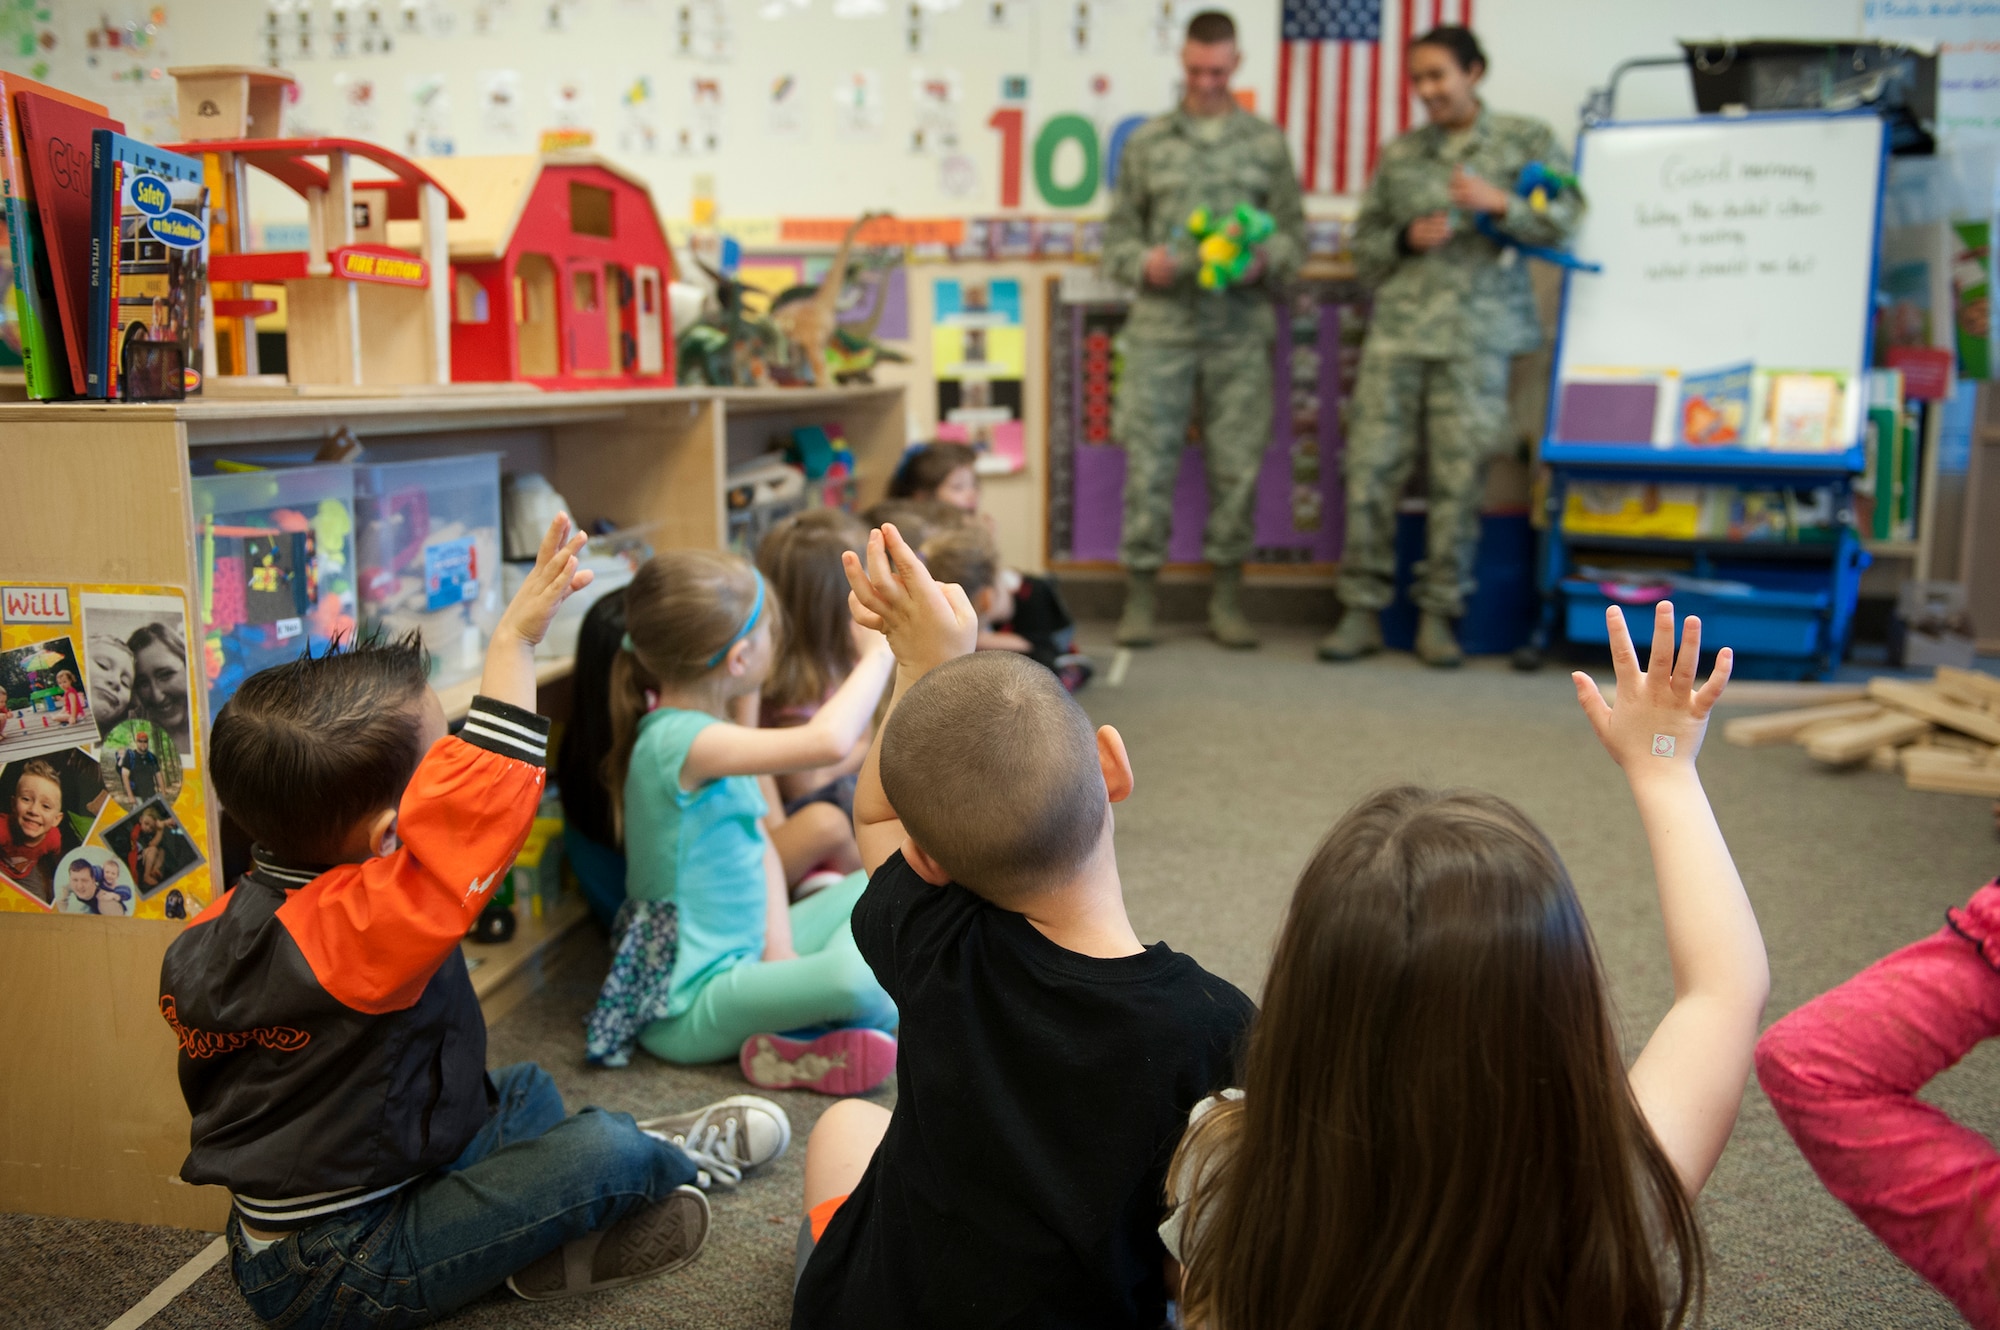 Children from the Child Development Center raise their hands during National Children’s Dental Health Month, Feb. 2, 2016, at Moody Air Force Base, Ga. A dentist and dental assistant from the 23d Aerospace Medical Squadron spoke with the children about the importance of dental hygiene. (U.S. Air Force photo by Airman 1st Class Kathleen D. Bryant/Released)
